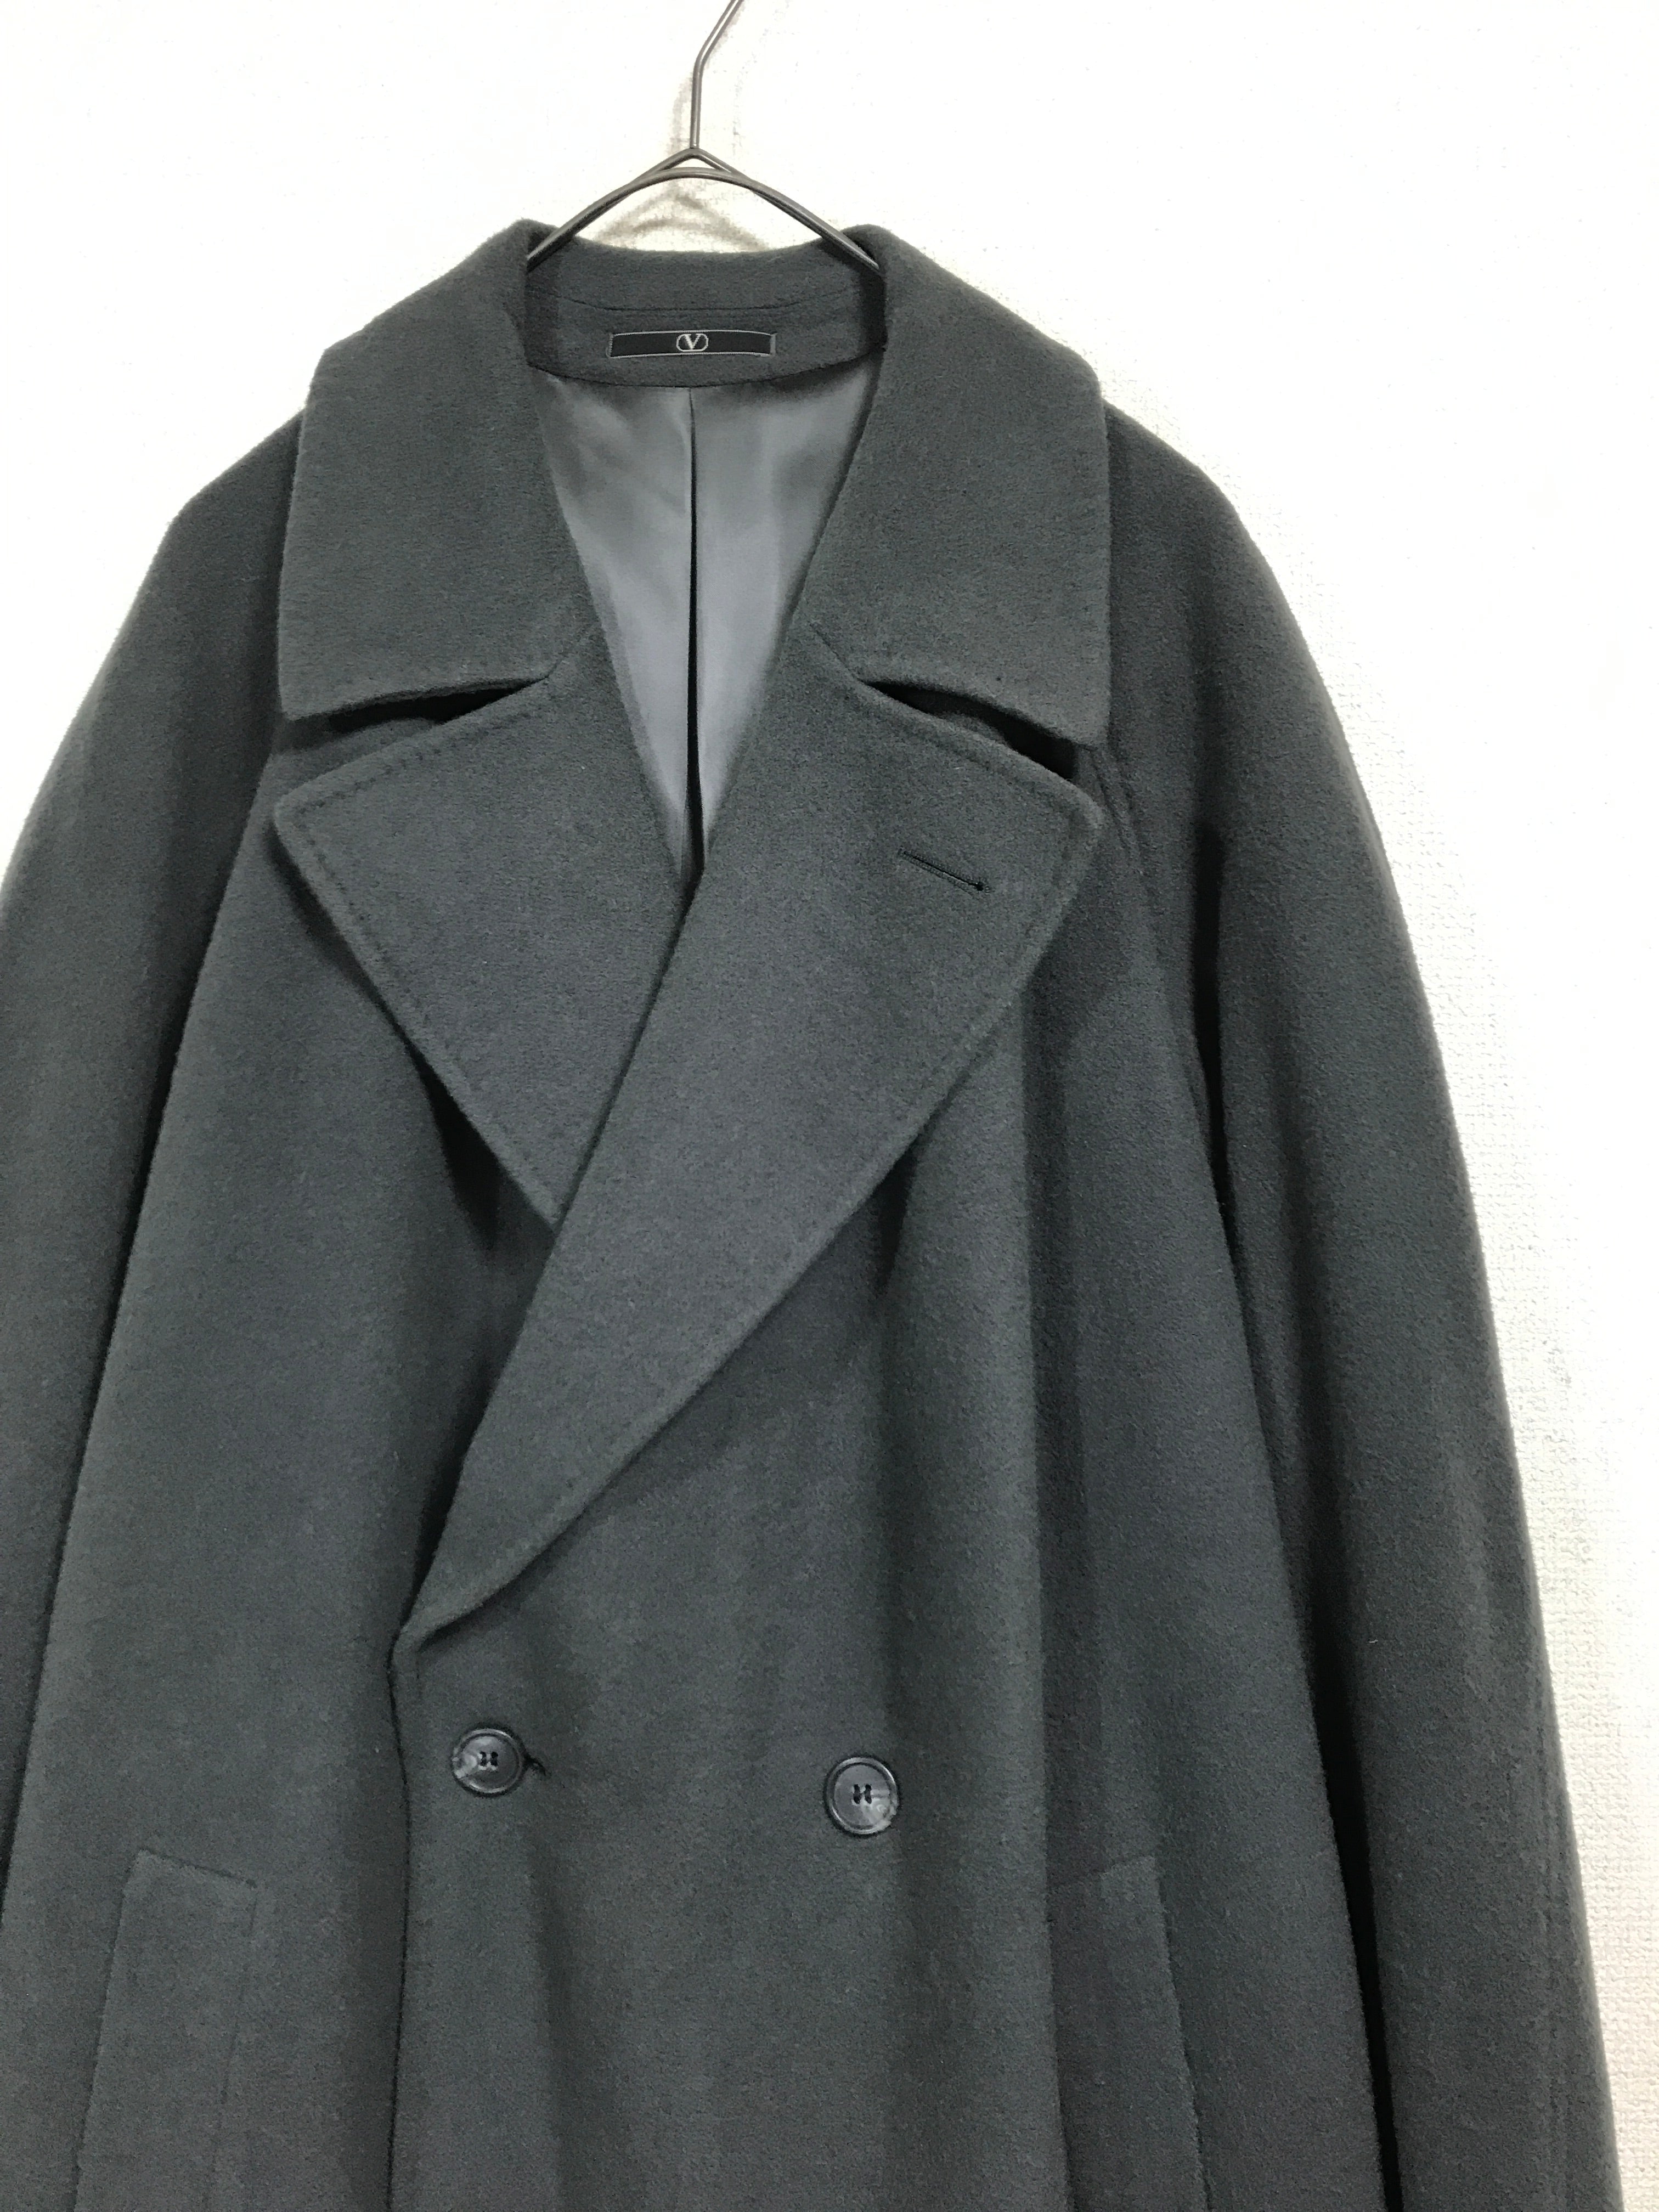 80’s Valentino wool/cashmere double breasted chesterfield coat